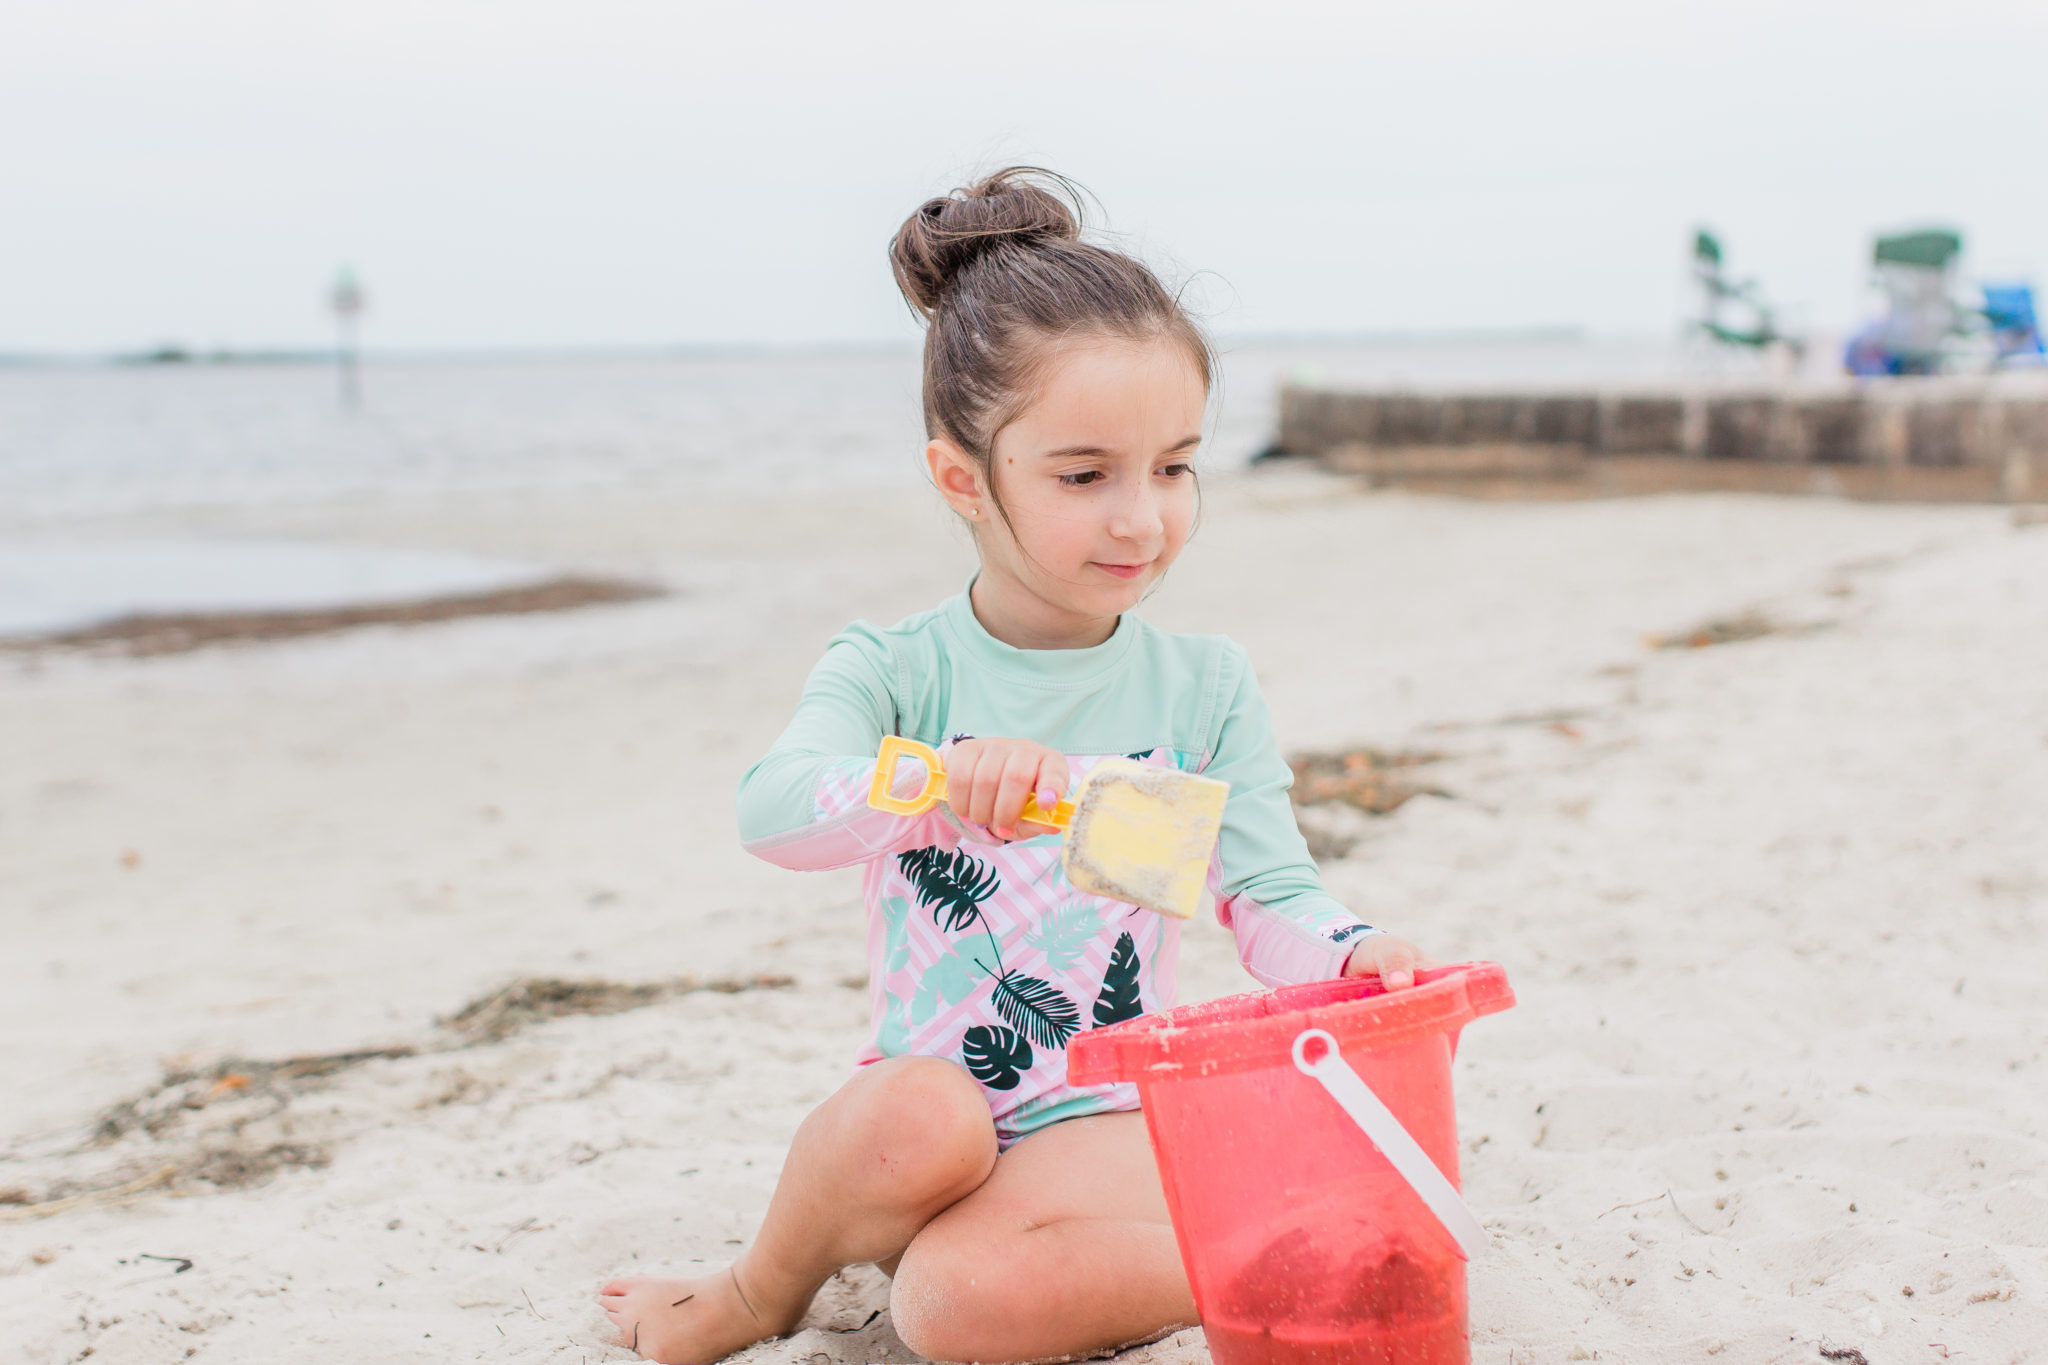 simple beach packing list for toddlers, surviving a day at the beach with kids, beach hacks for kids, beach tips for families, spending a day at the beach with babies and kids